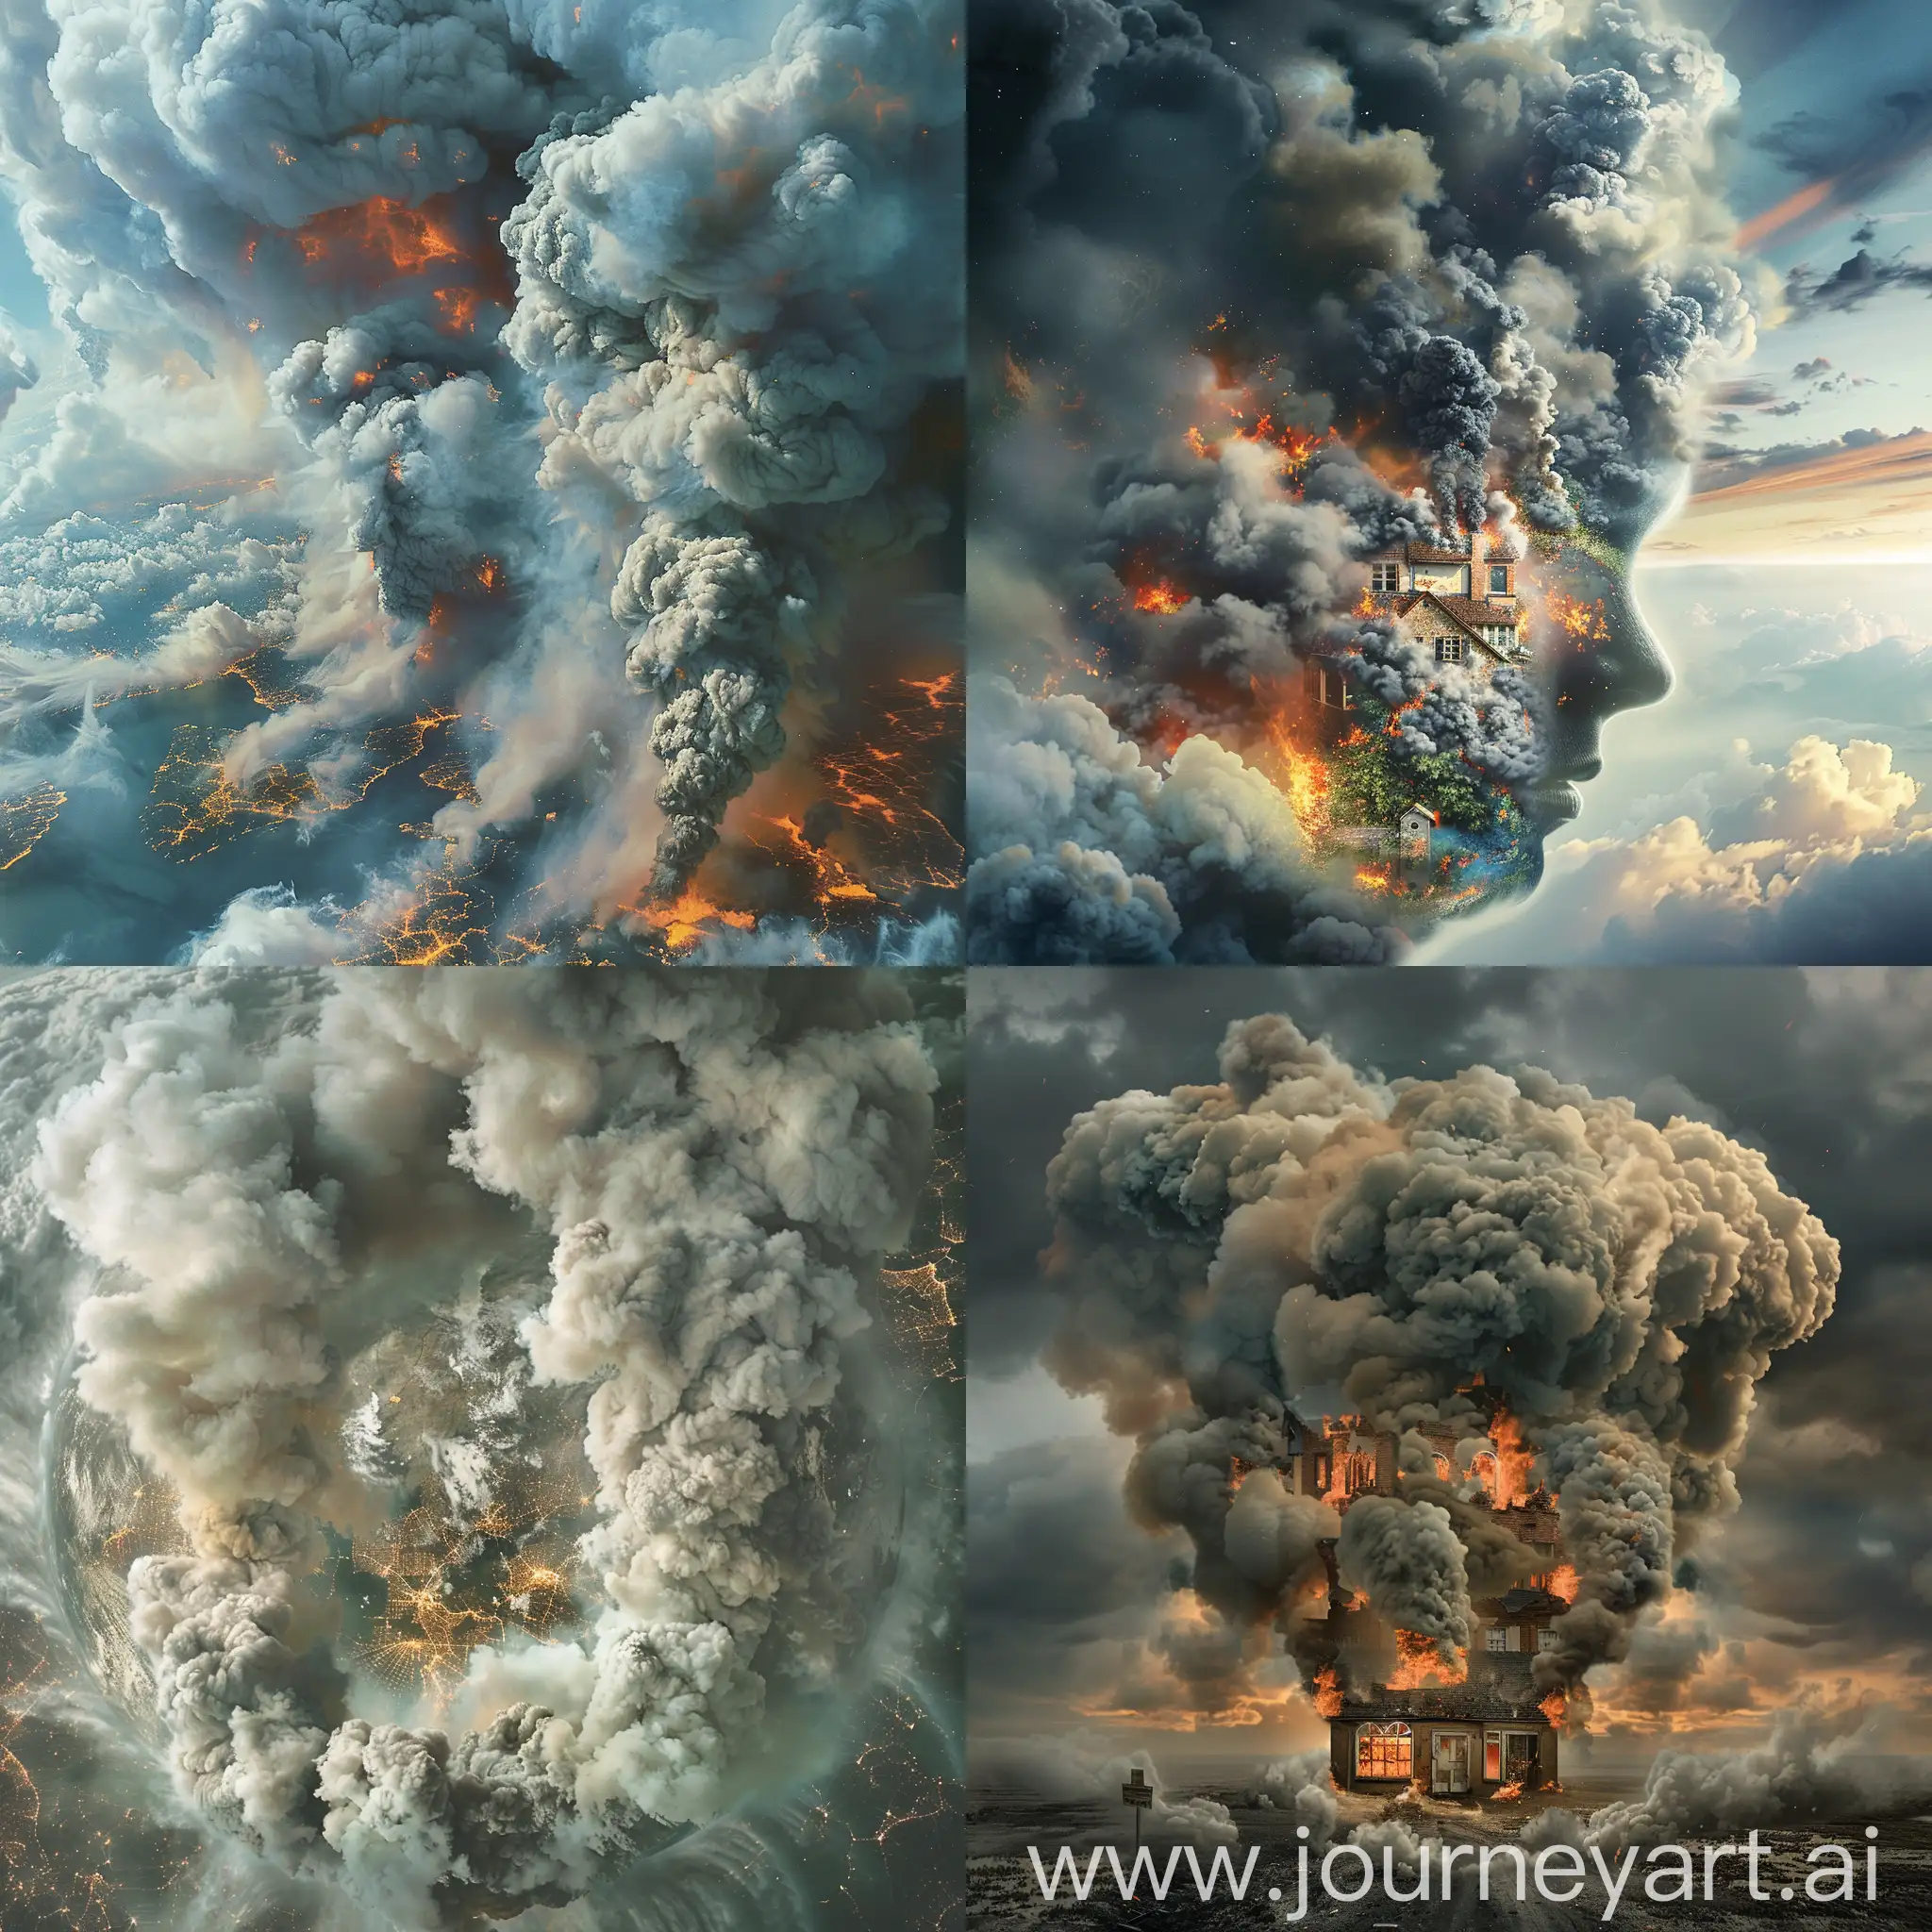 Dramatic-Sky-Filled-with-Smoke-Enveloping-a-Burning-House